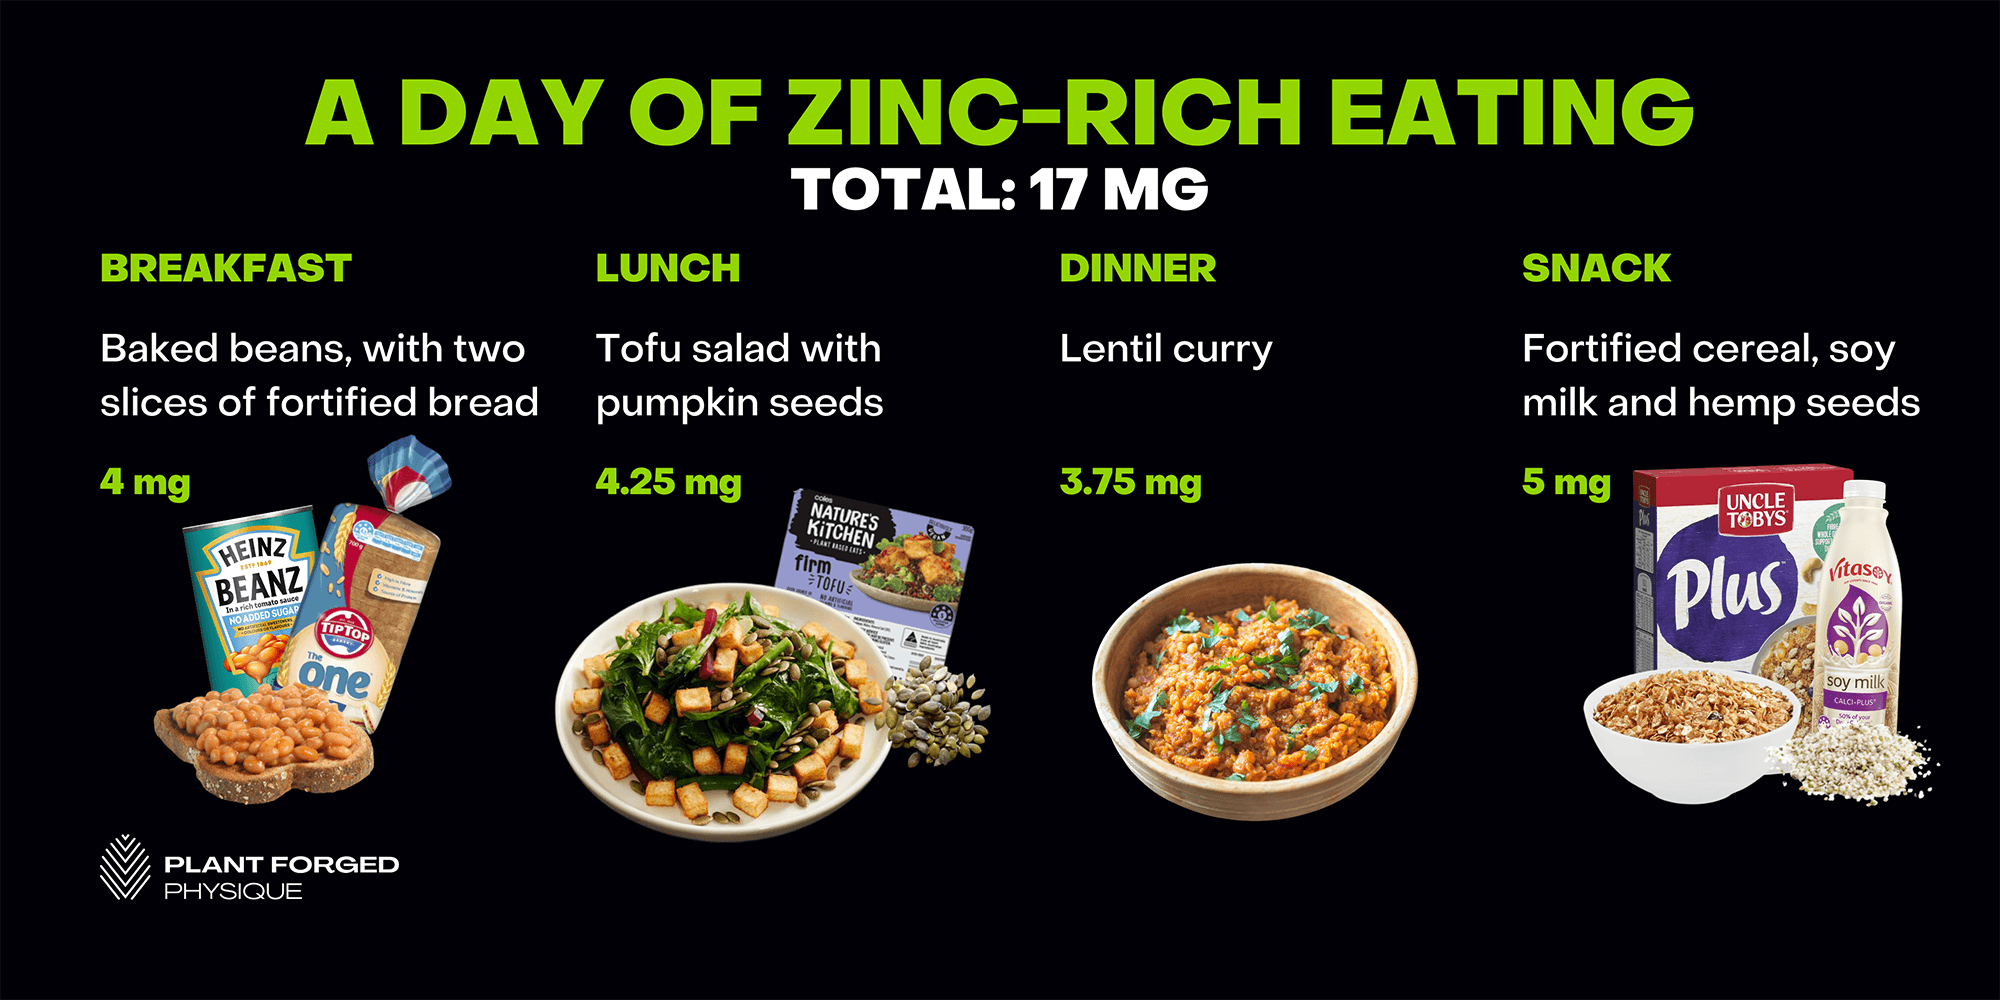 A day of zinc-rich eating